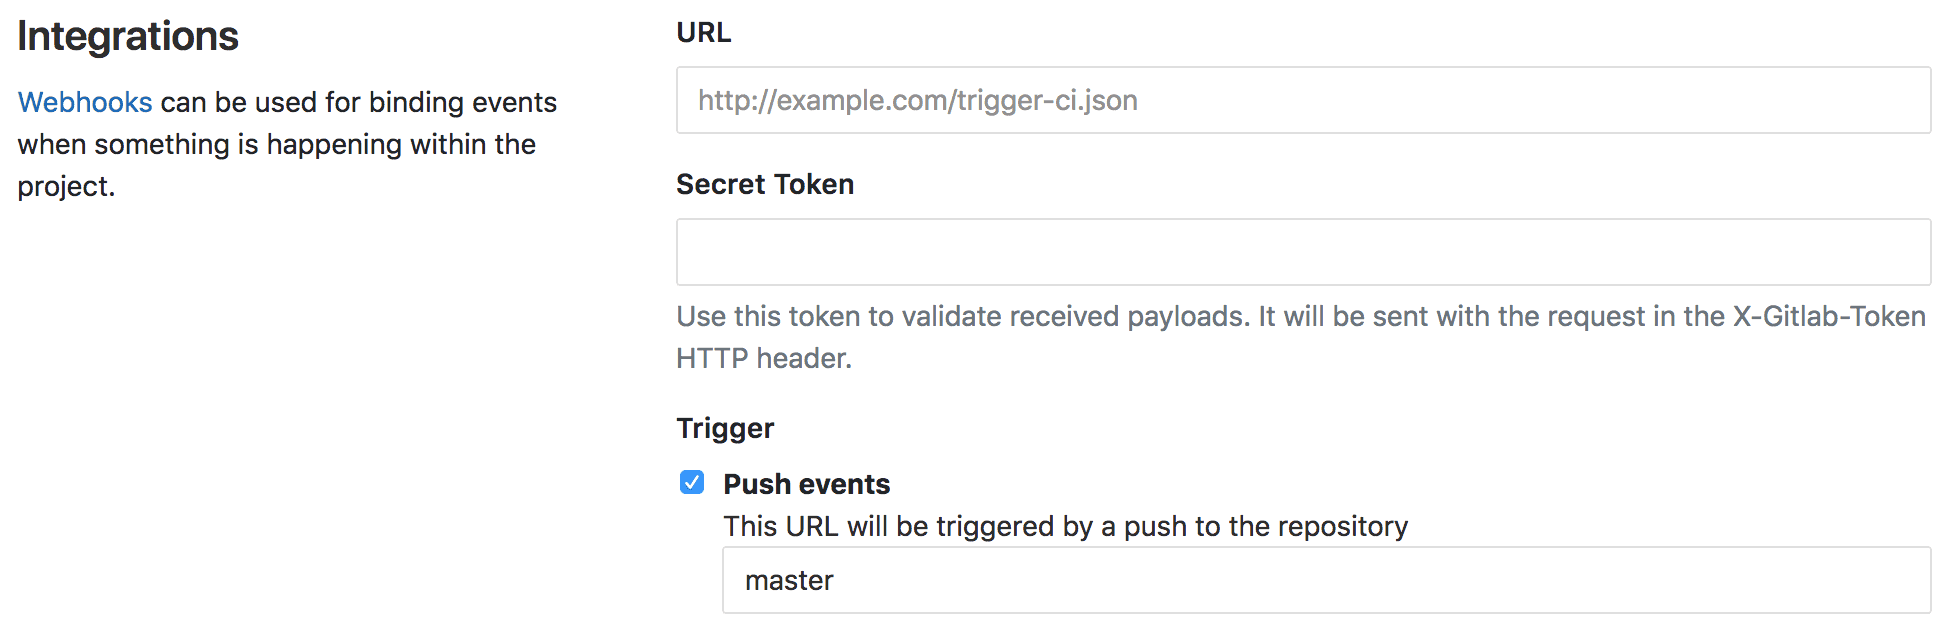 Filter webhook push events by branch